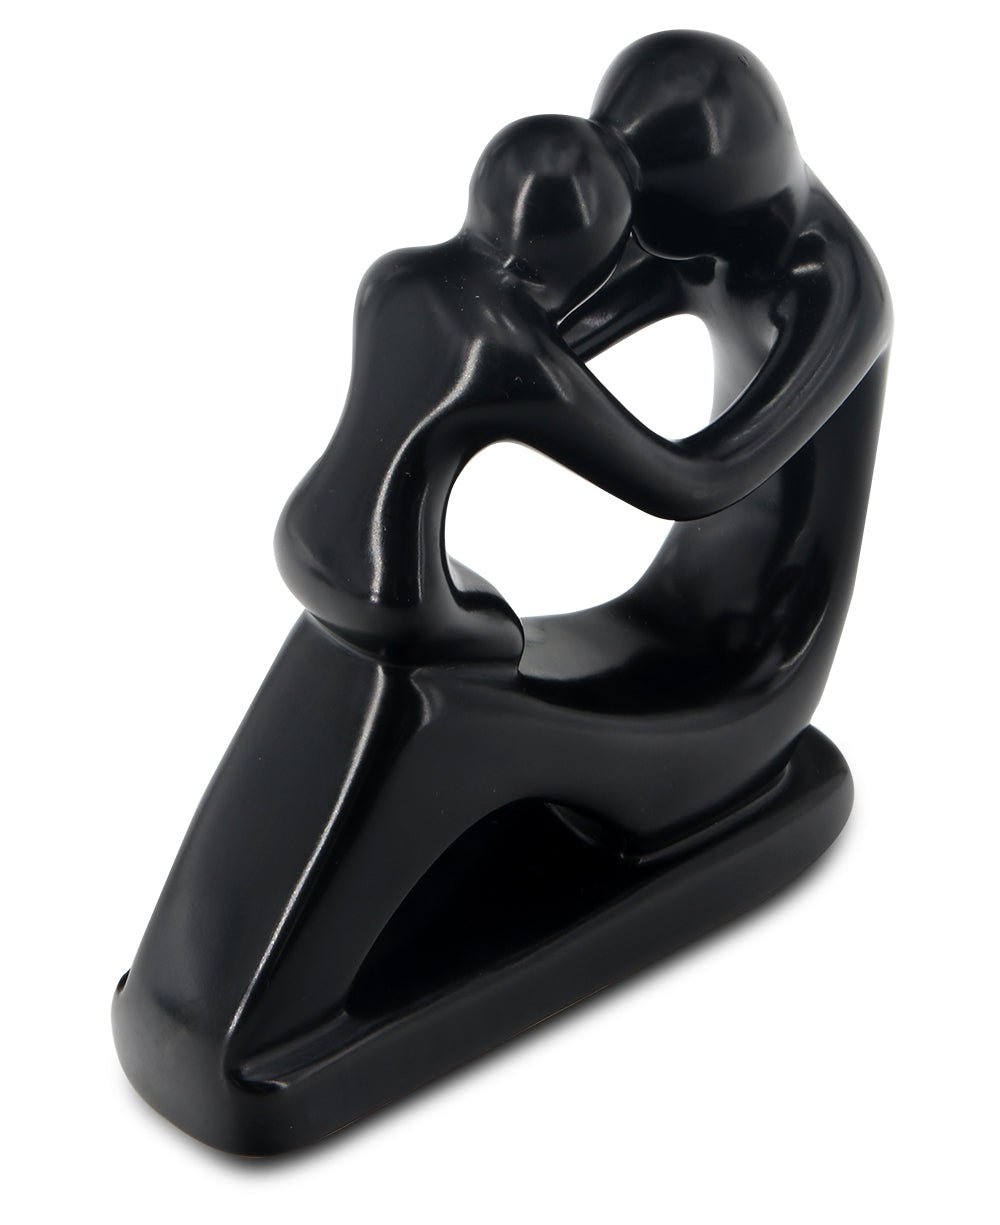 Abstract Mother and Baby Soapstone Statue, Crafted in Kenya - Sculptures & Statues Black